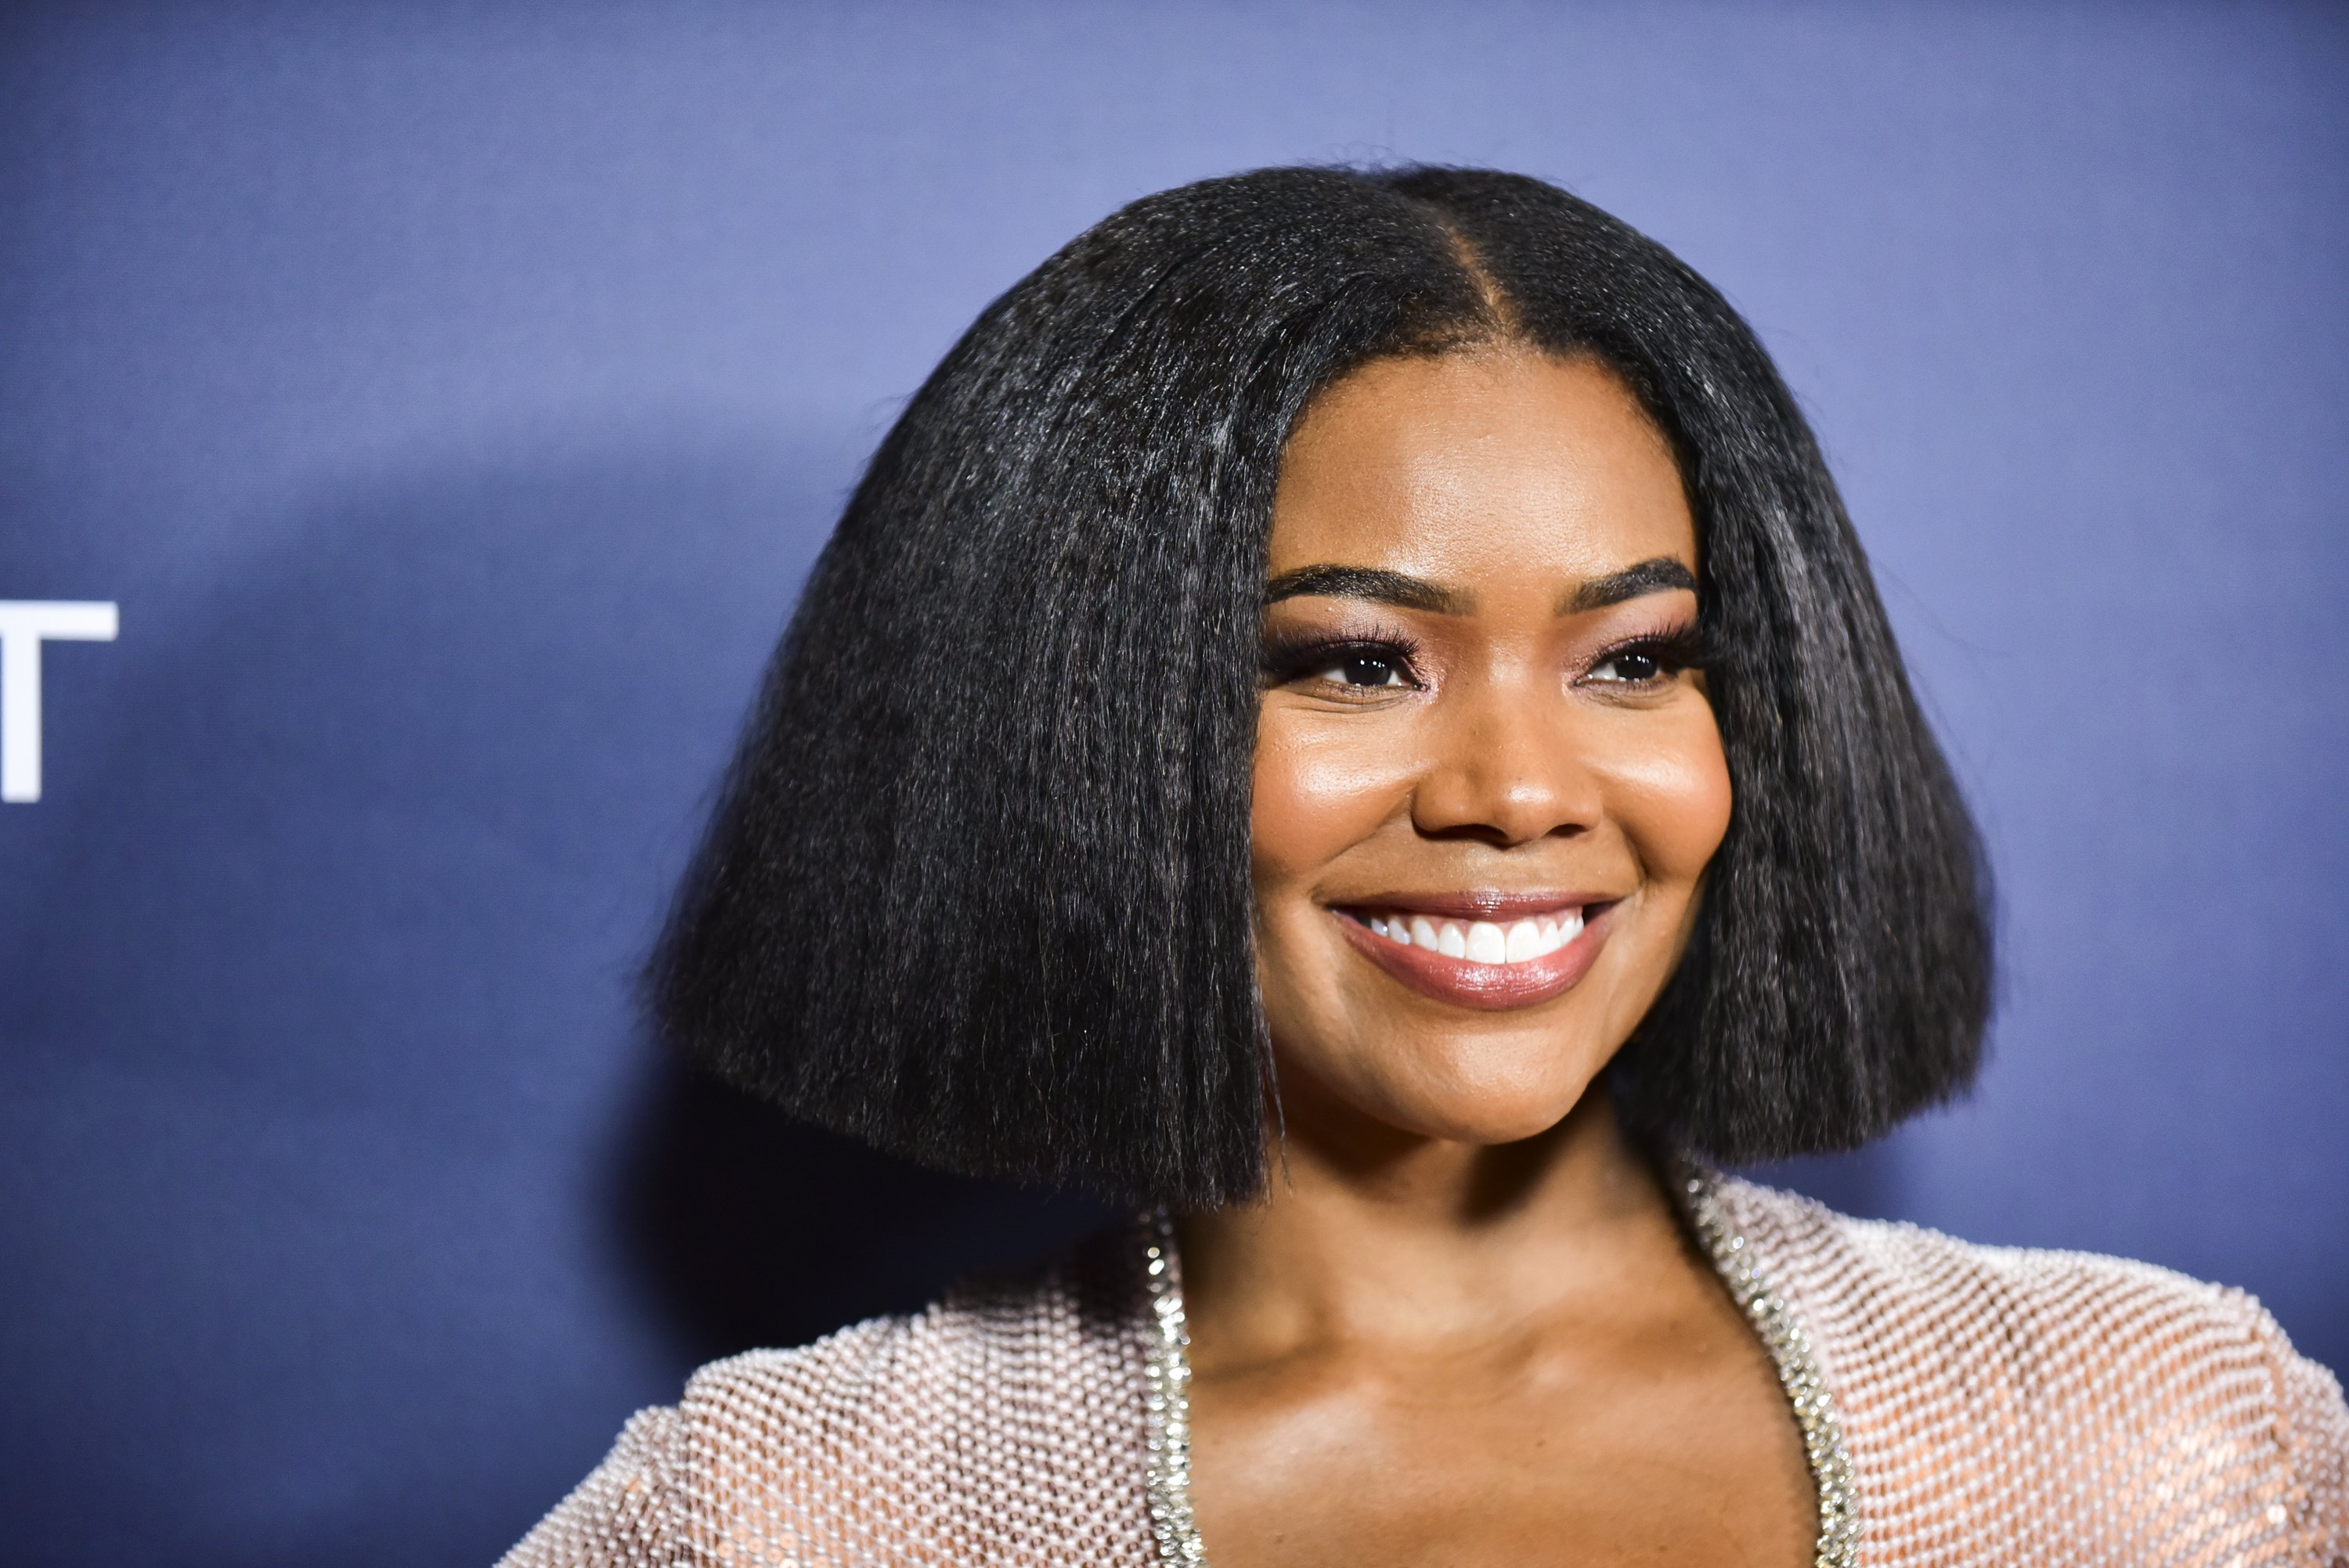 : Gabrielle Union attends the "America's Got Talent" Season 14 Finale Red Carpet at Dolby Theatre on September 18, 2019|Photo: Getty Images